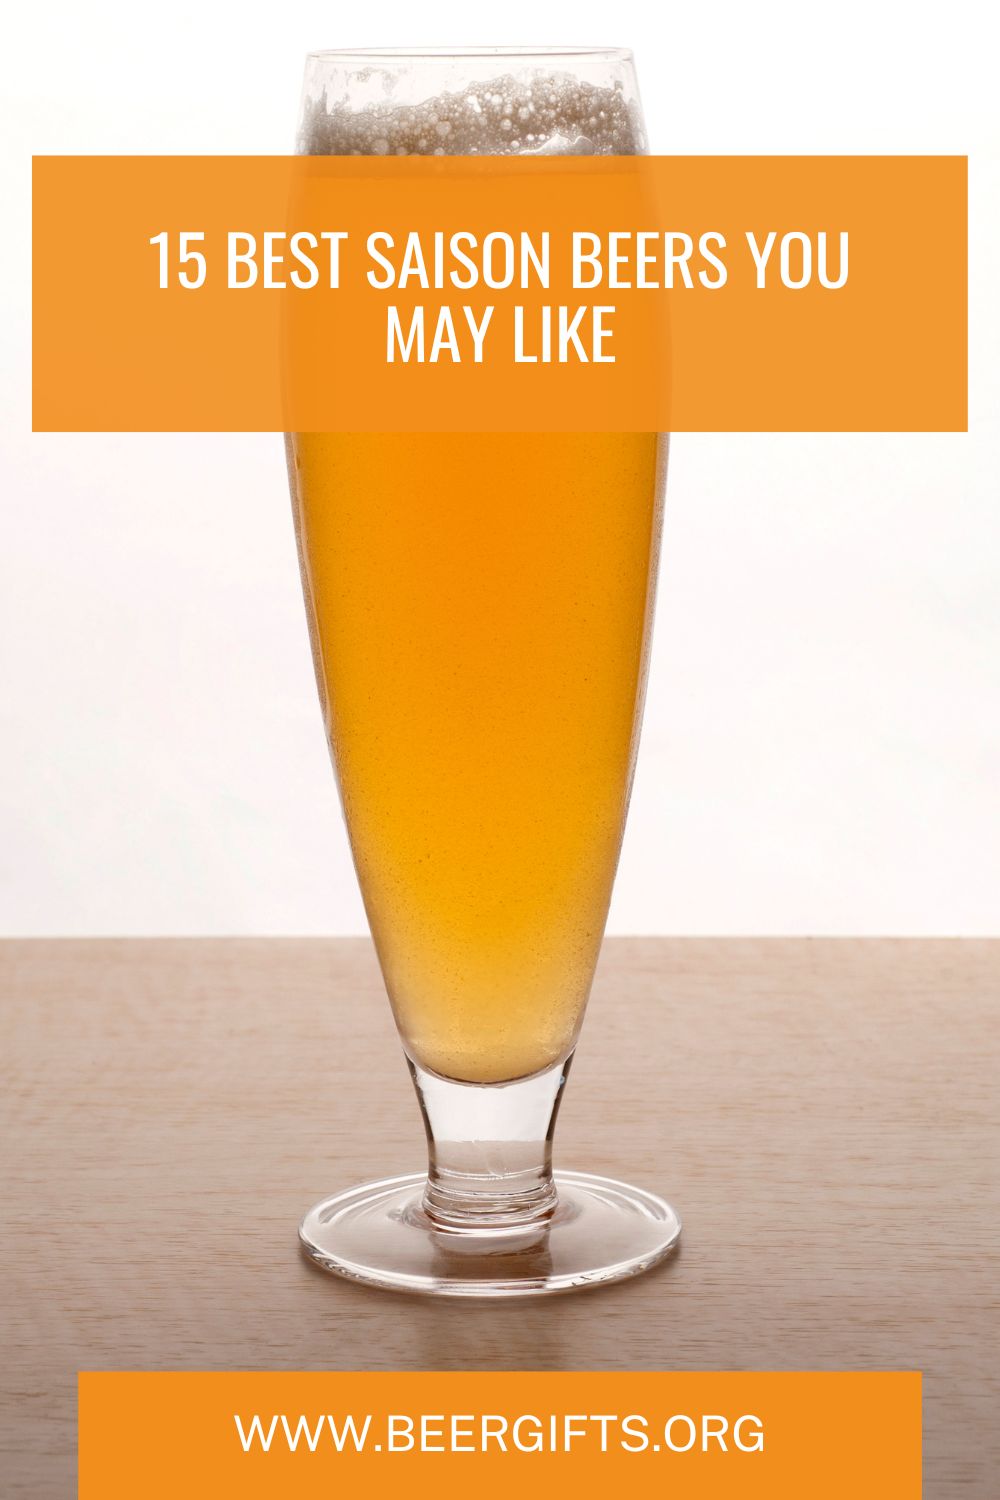 15 Best Saison Beers You May Like2